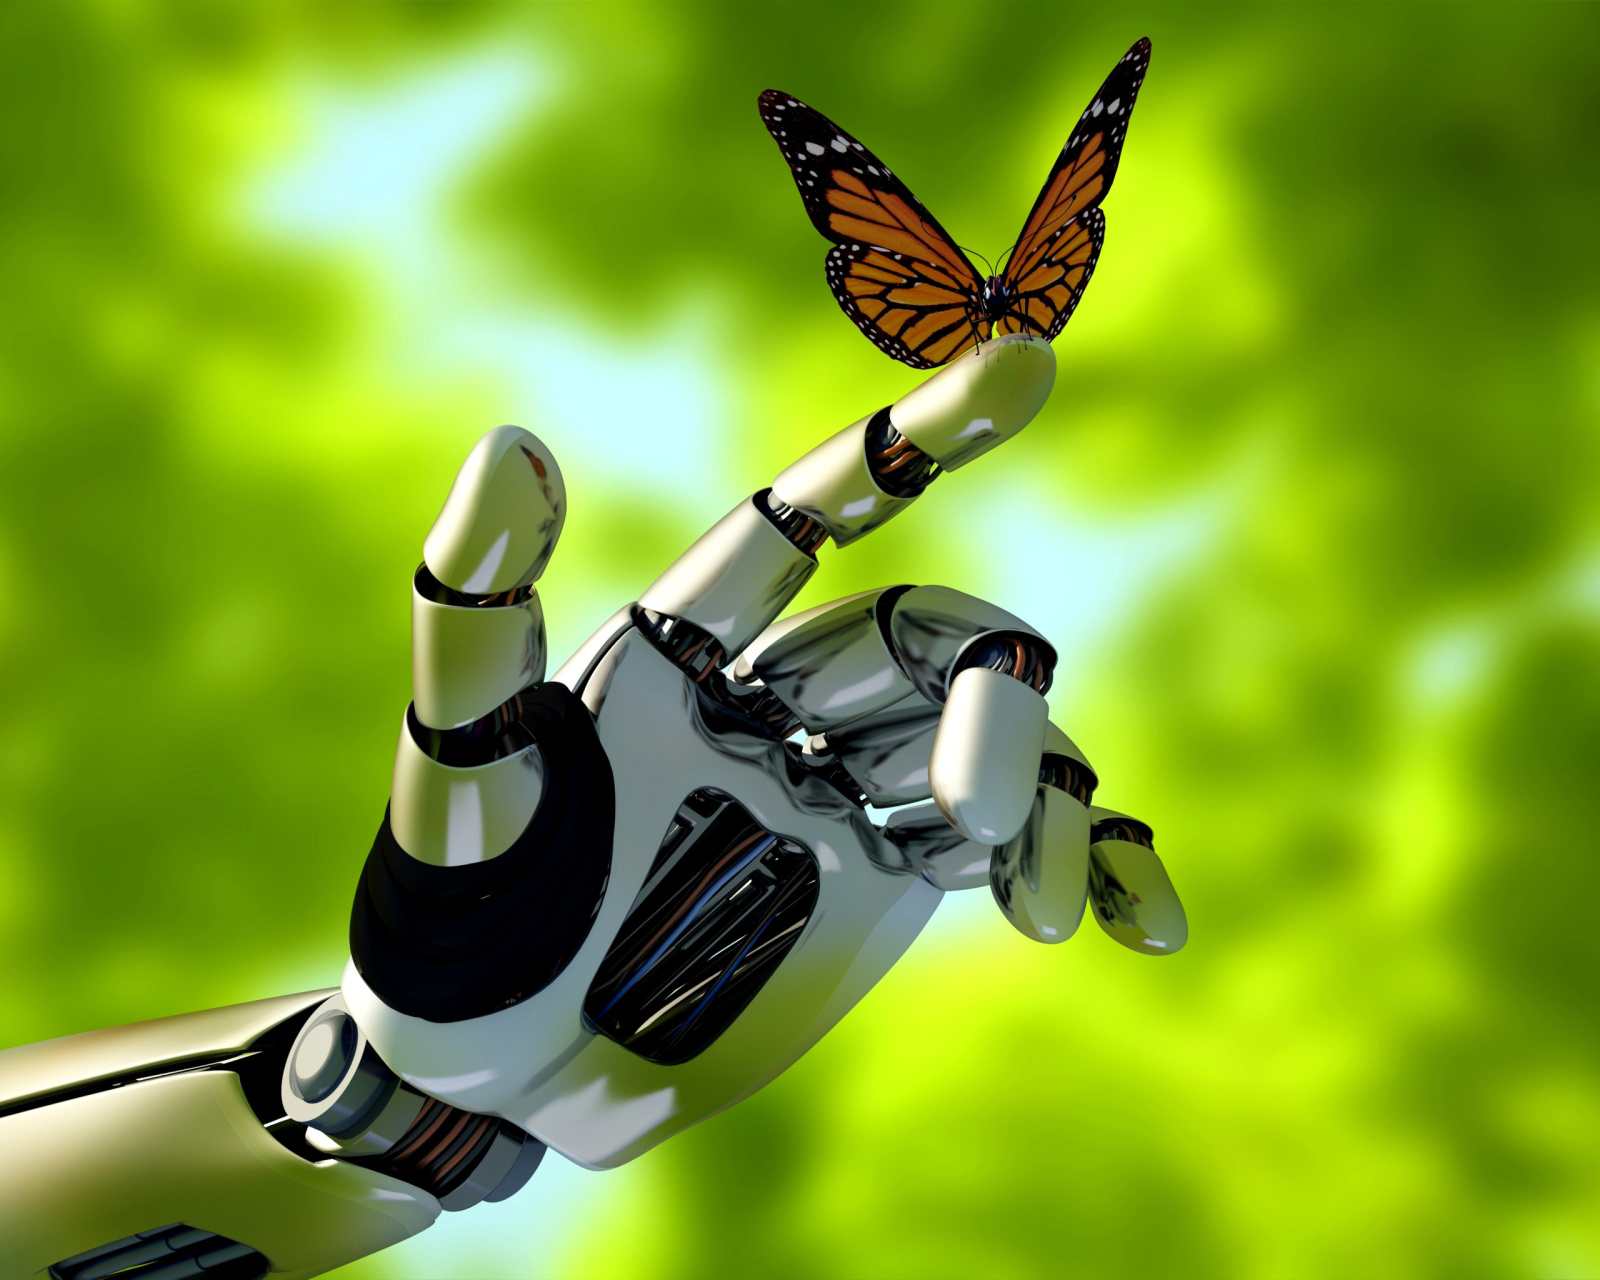 Robot hand and butterfly wallpaper 1600x1280